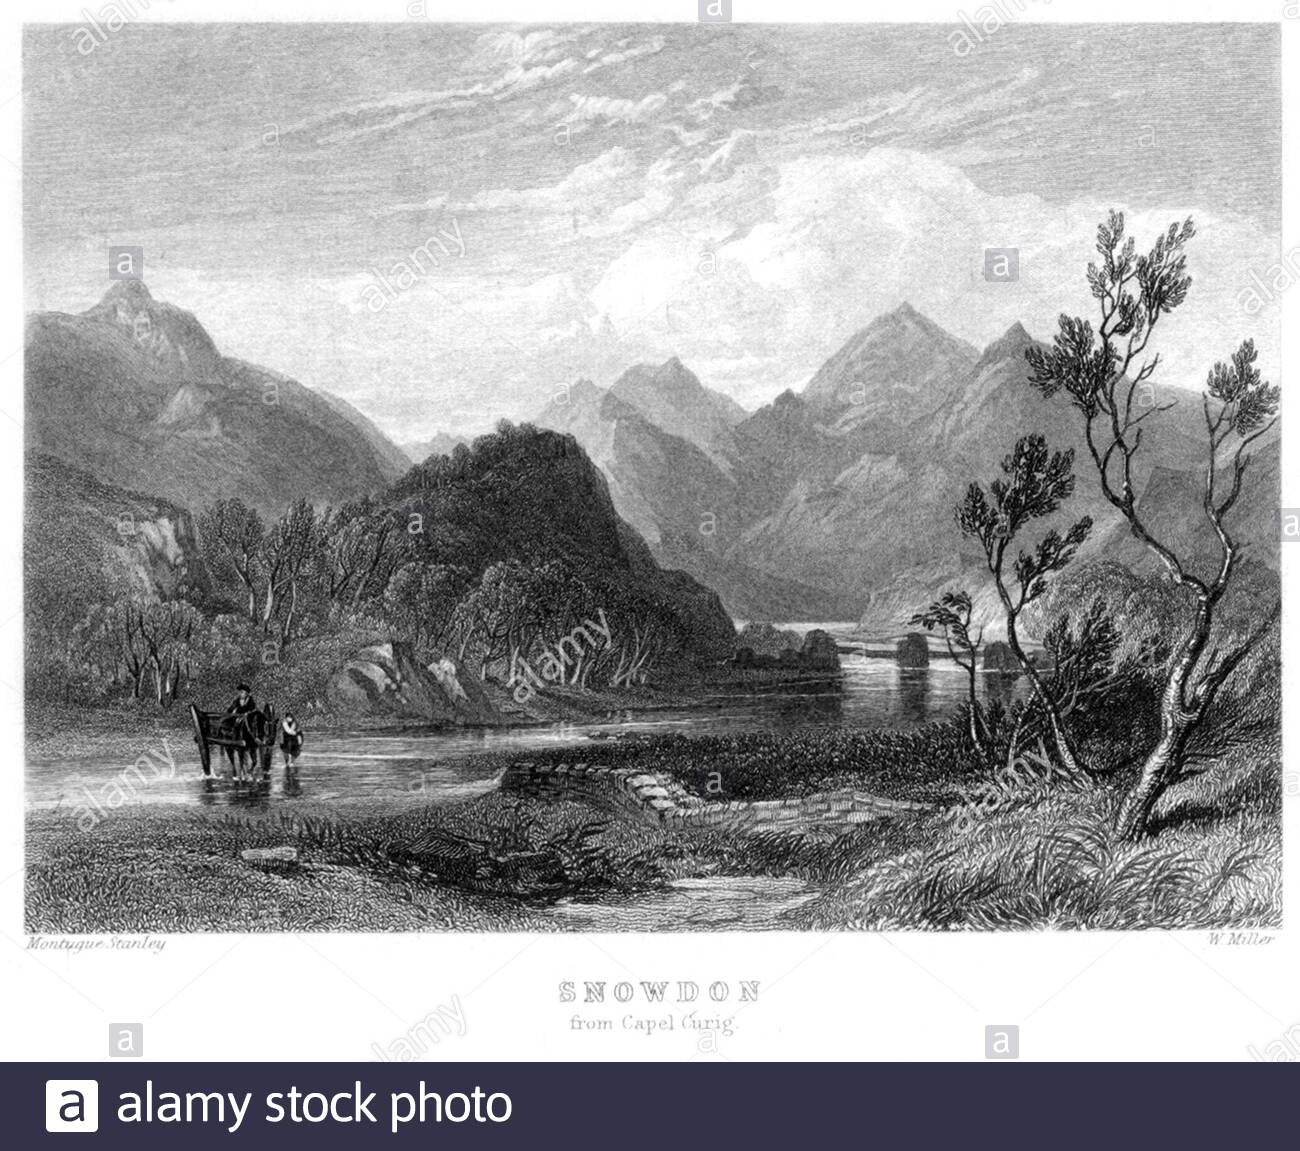 Snowdon from Capel Curig, Wales, vintage illustration from 1866 Stock Photo